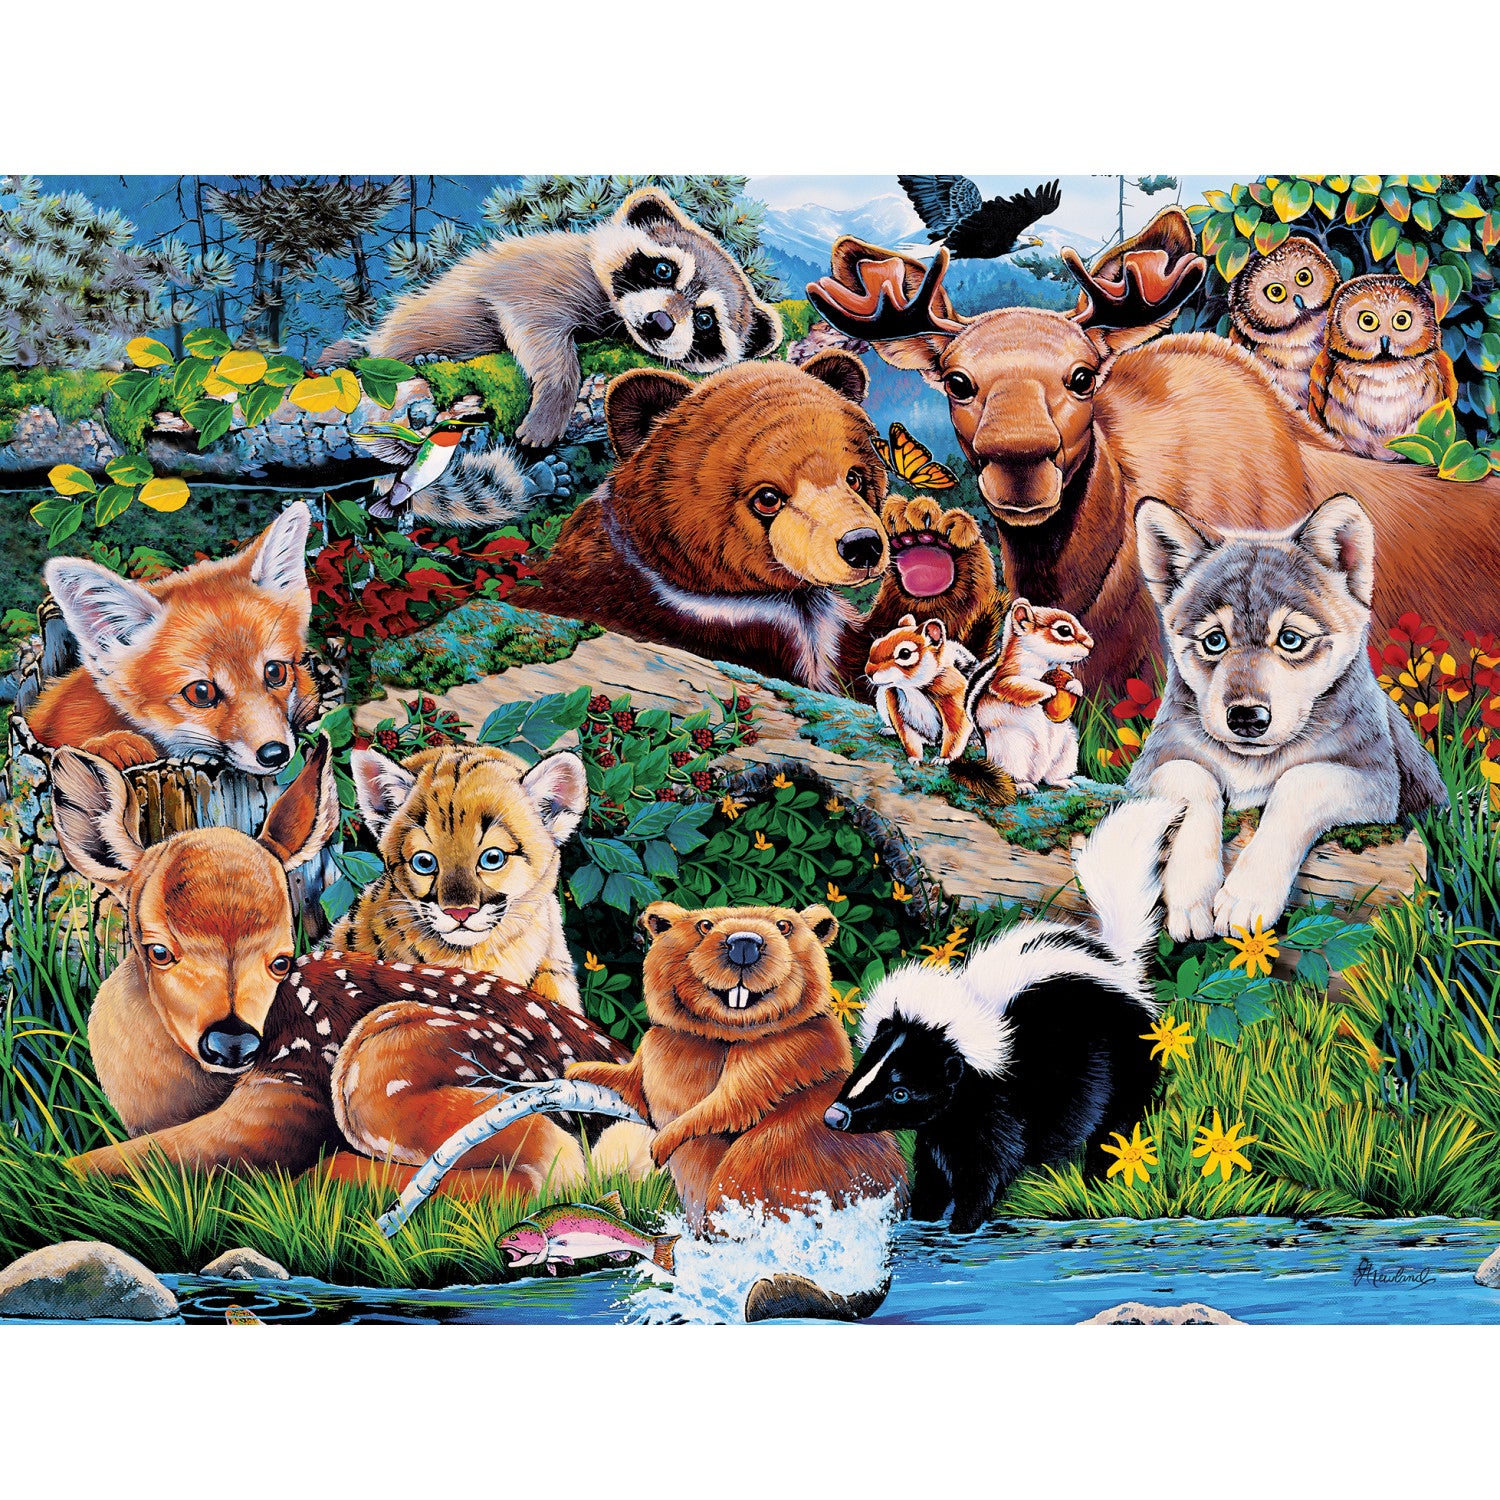 World of Animals - Forest Friends 100 Piece Puzzle